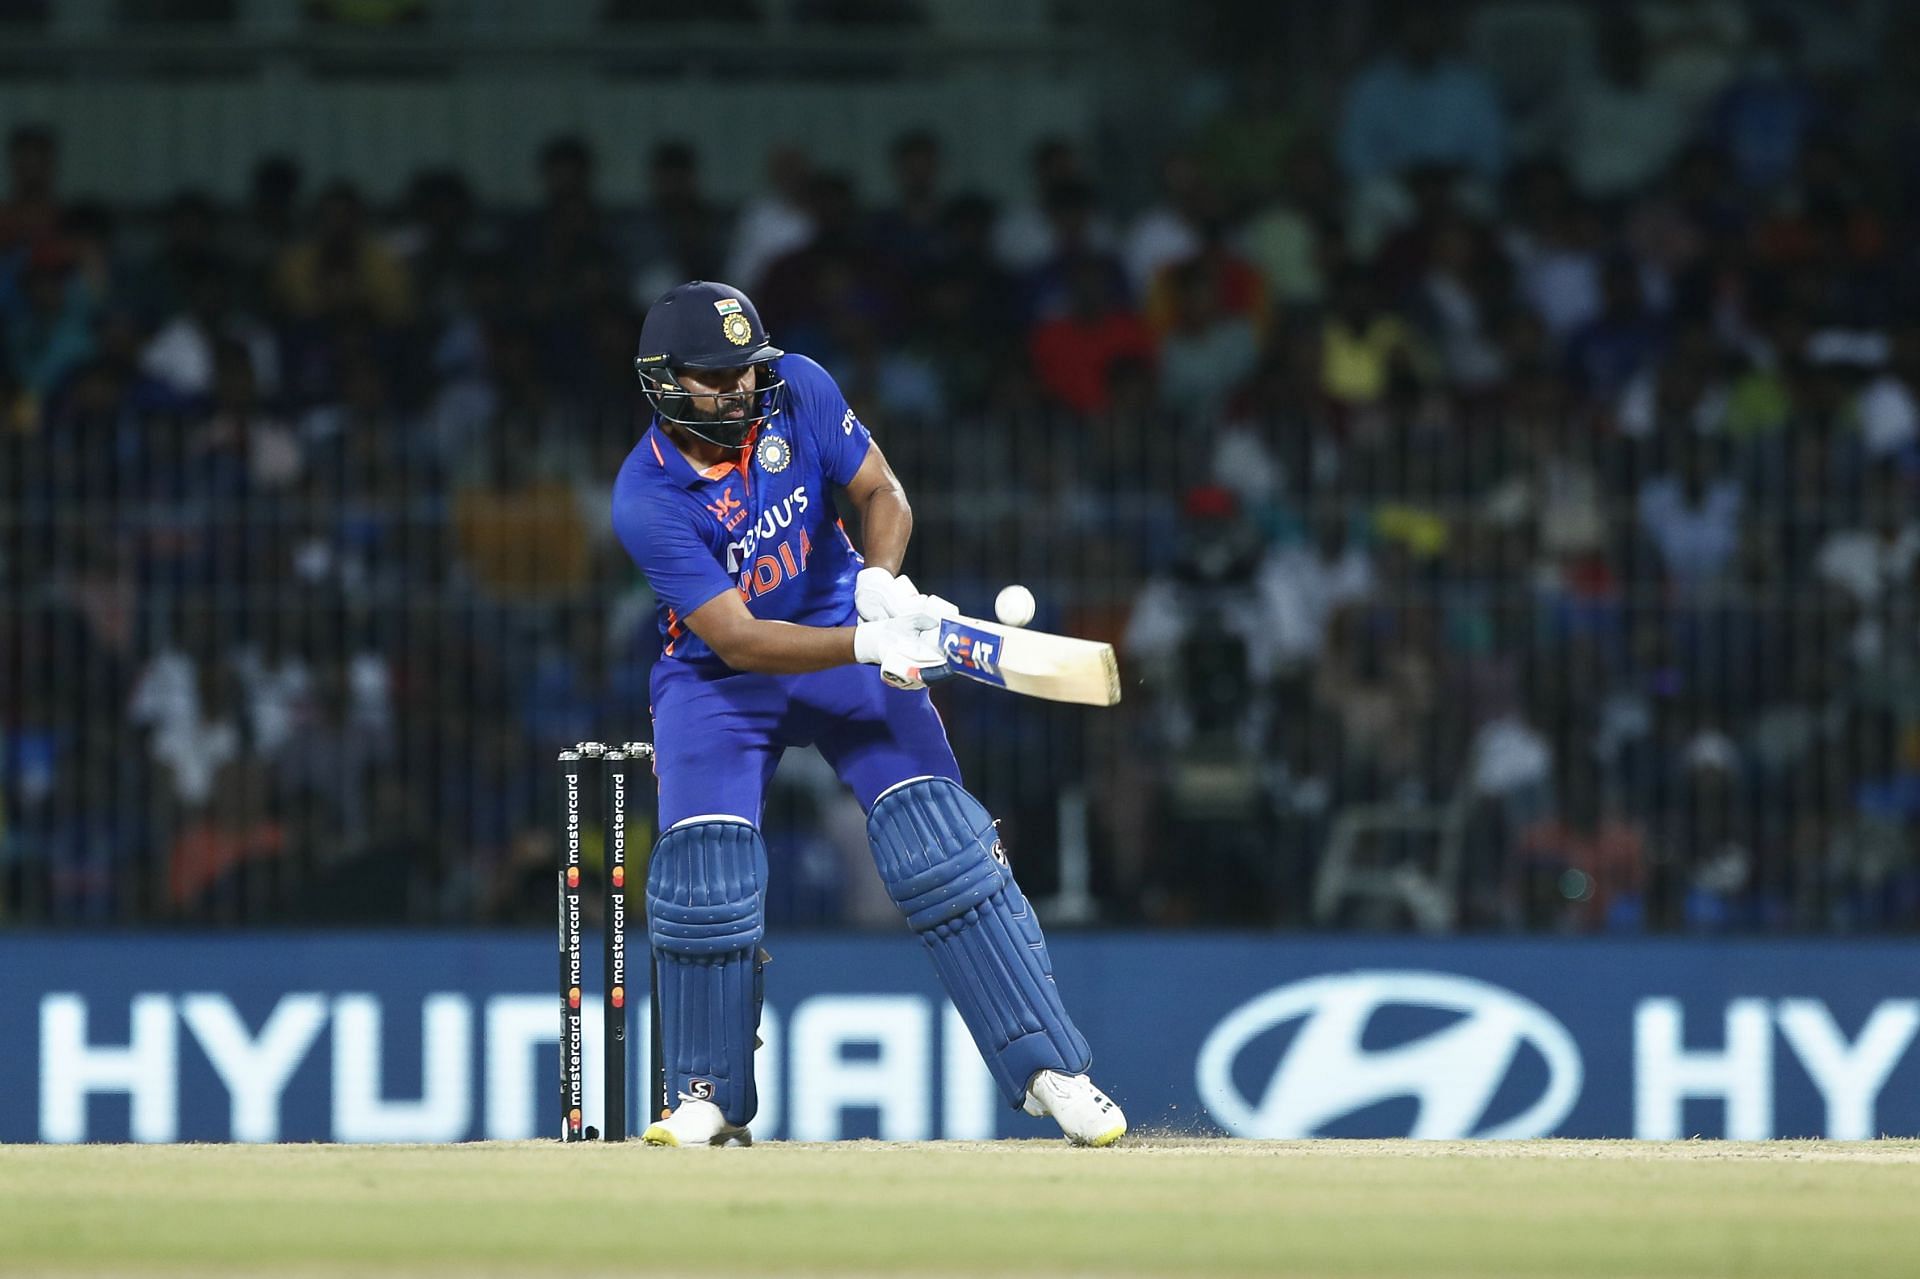 The likes of Rohit Sharma have not been in great form lately.